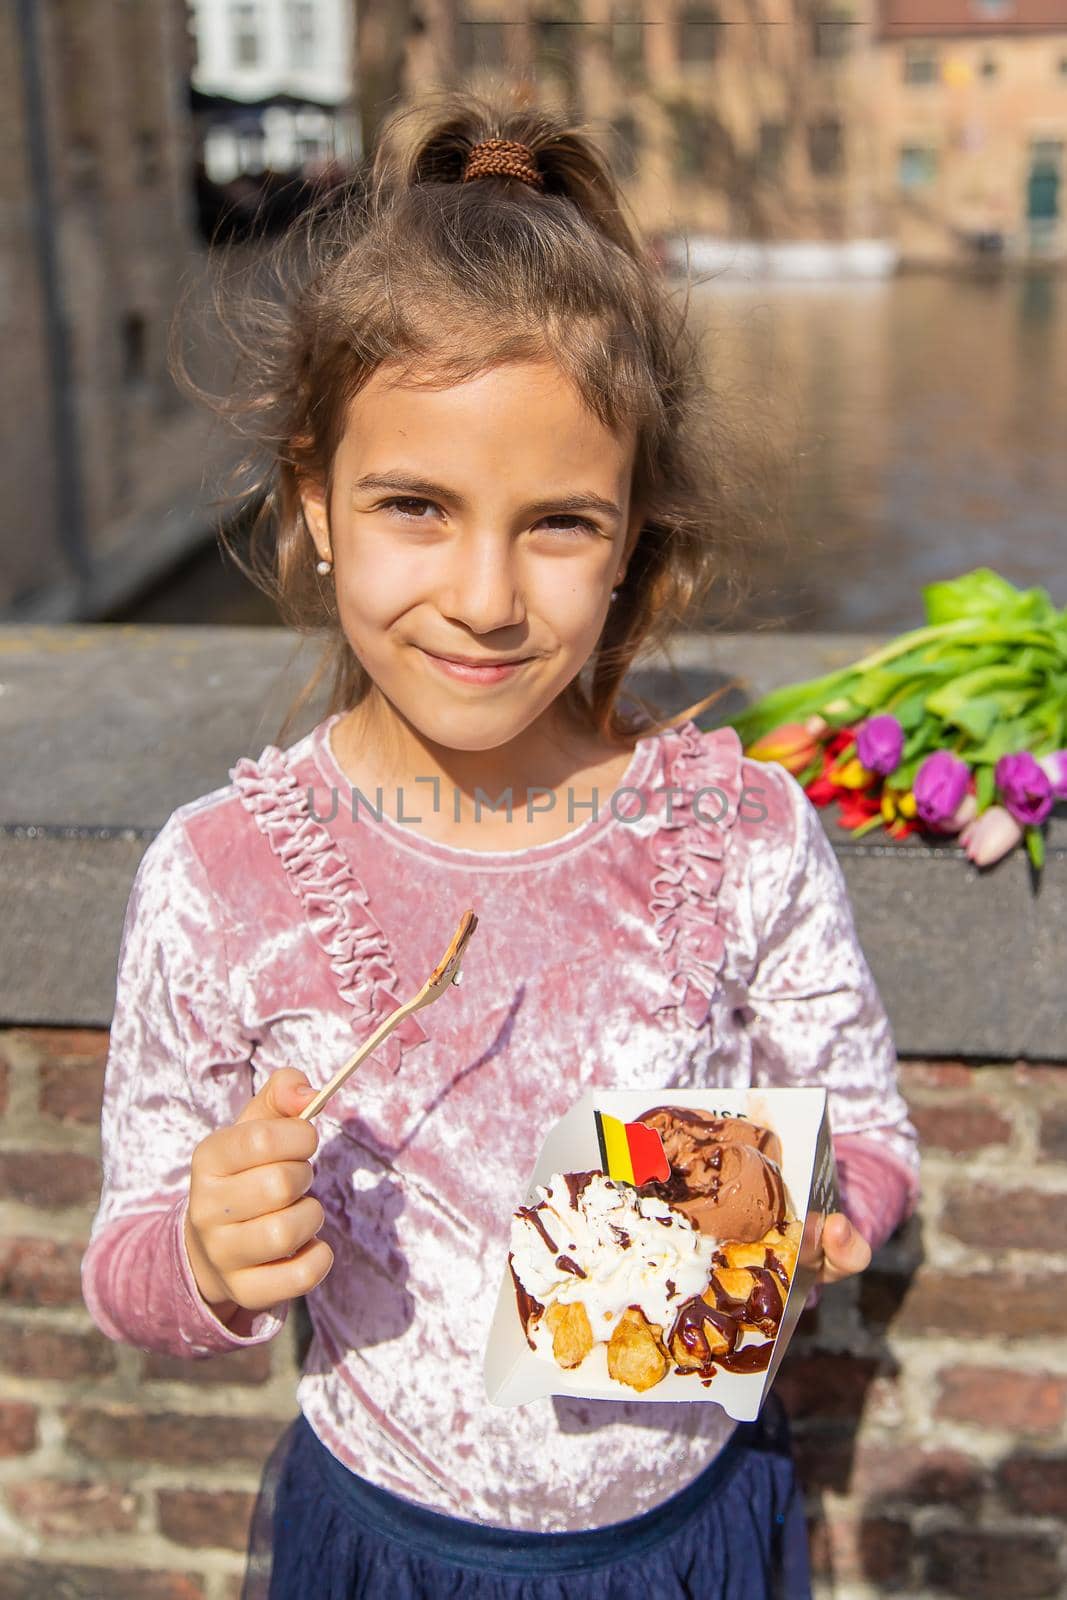 Belgian waffles are eaten by children on the street. Selective focus. Food.